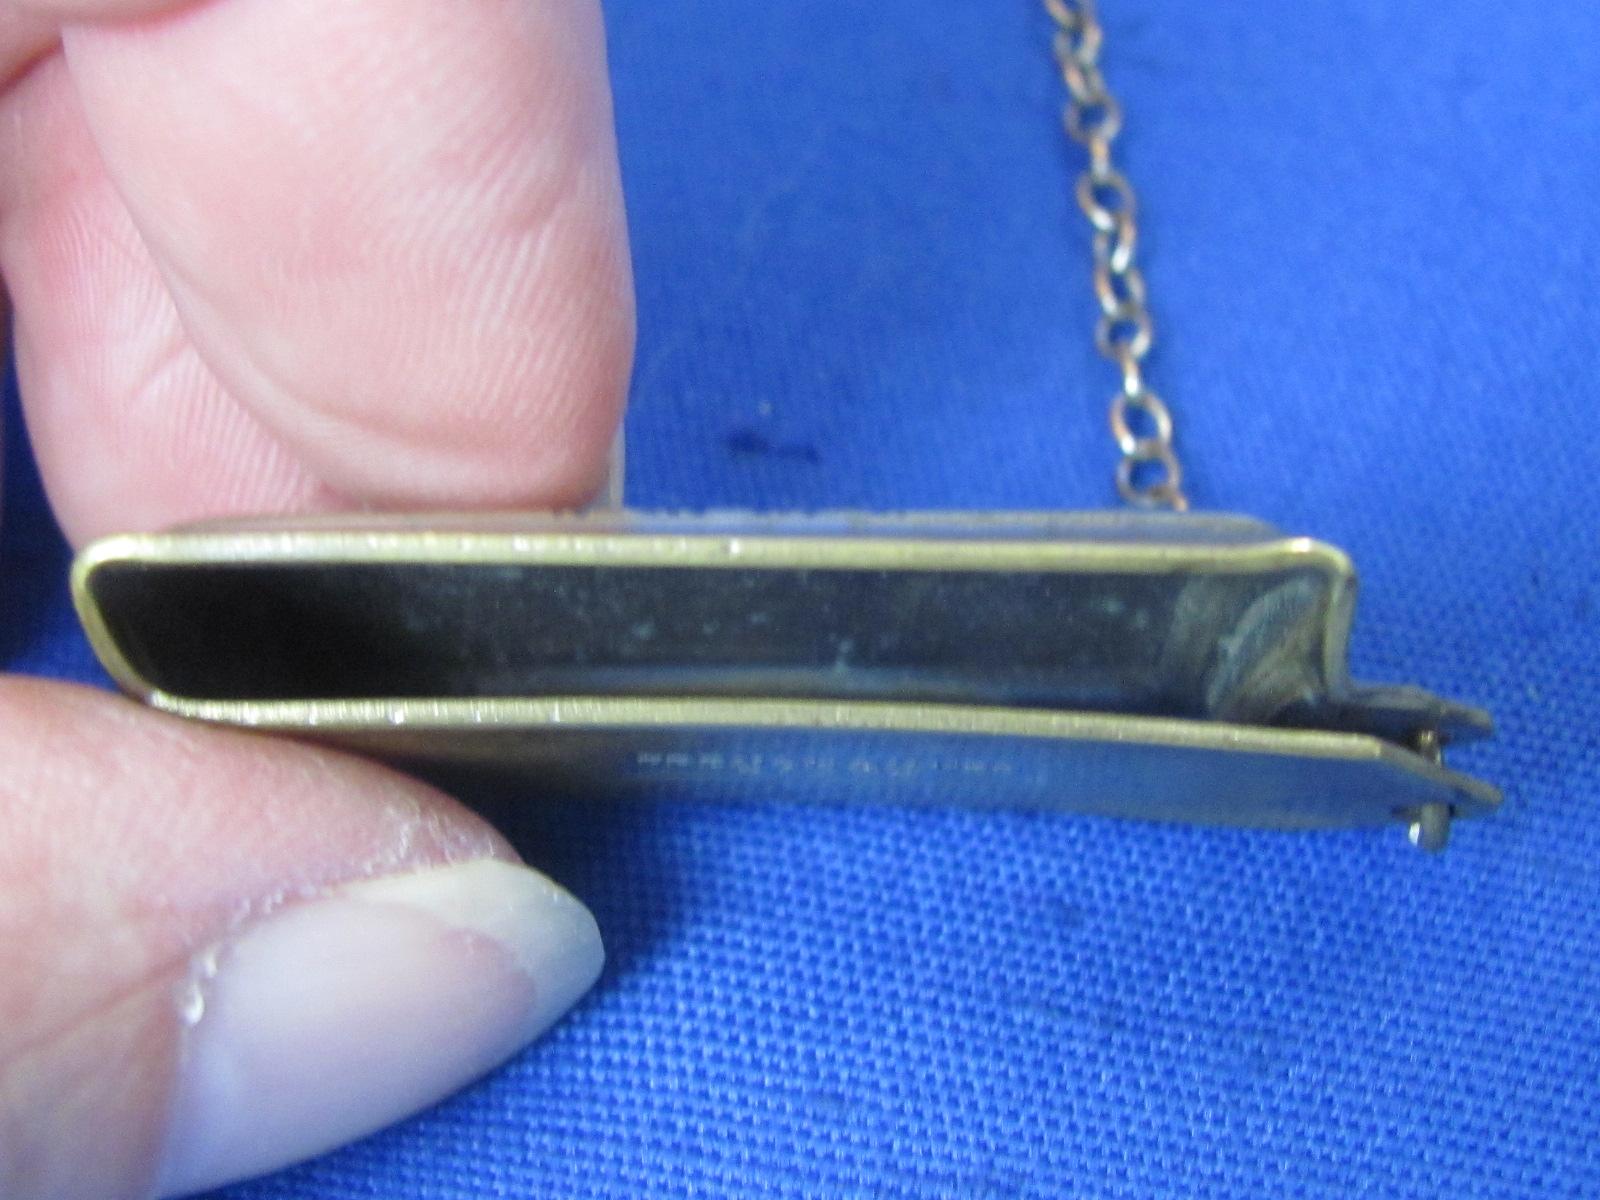 Pocket Watch Chain with Fob – Marked “French Silver Plate” - Total length is 8 3/4”